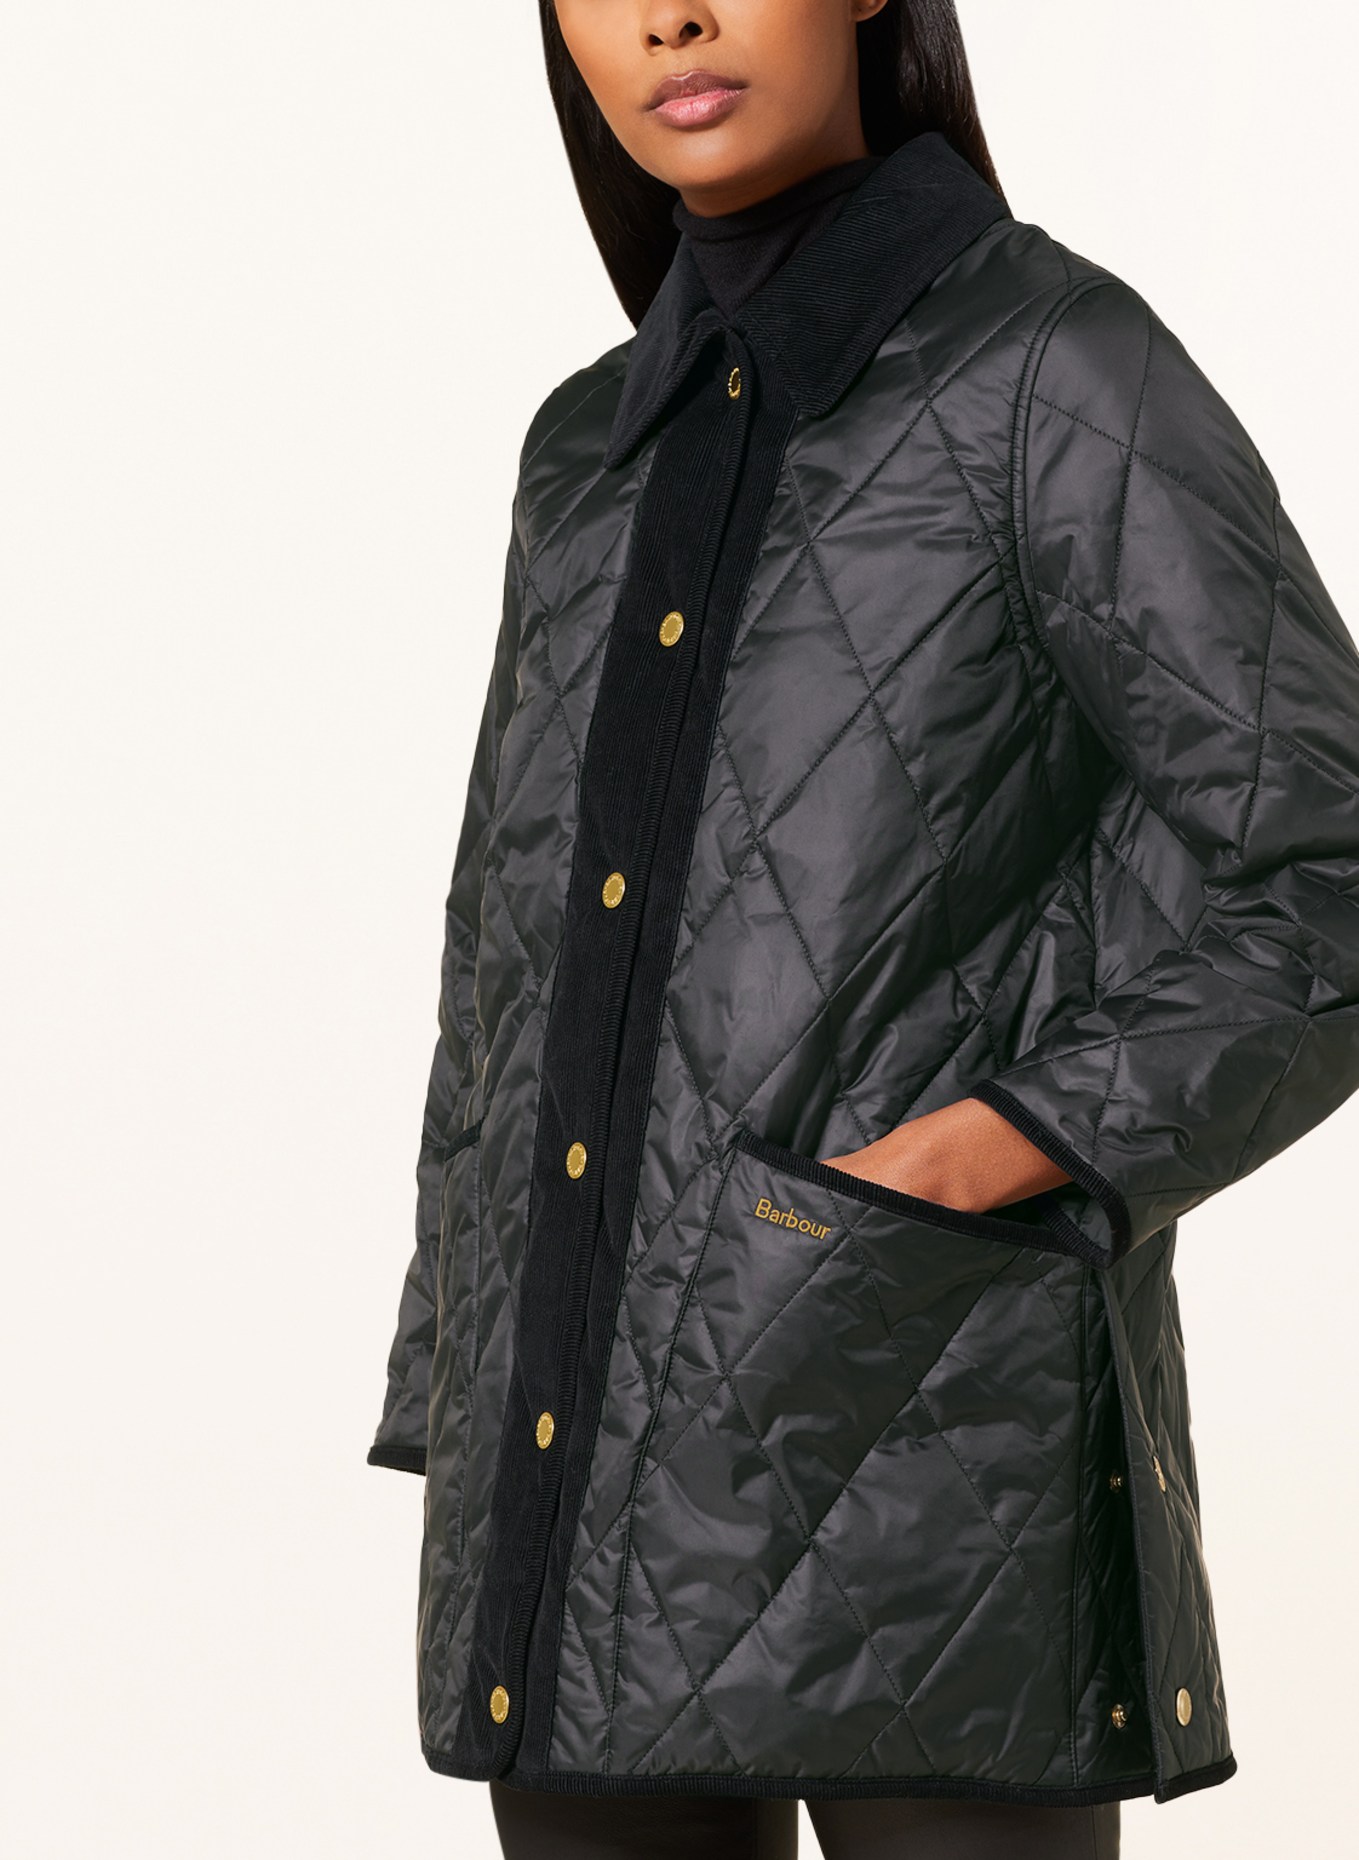 Barbour Powell Quilted Jacket - Olive | Quilted Jackets | Huckberry